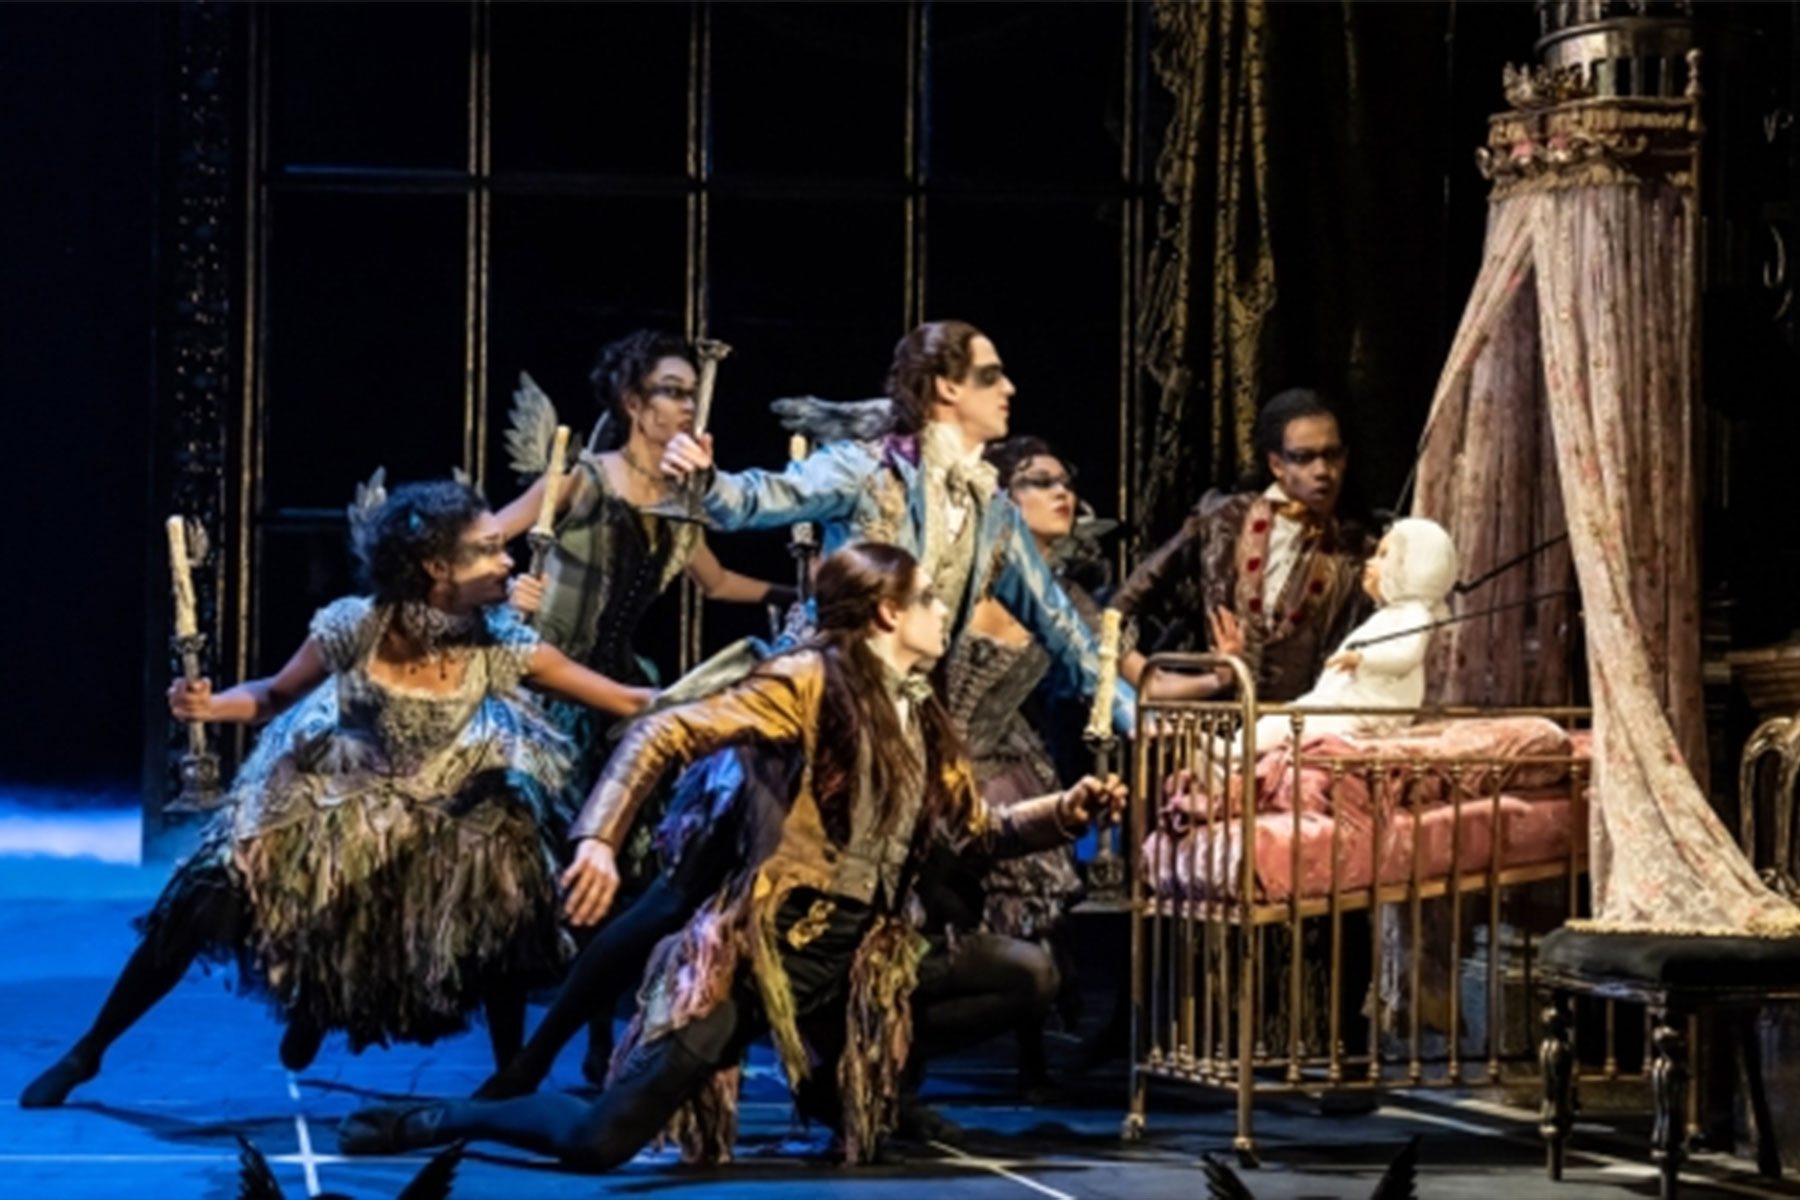 A scene from Matthew Bourne's Sleeping Beauty showing fairies gathering around a baby in a cradle